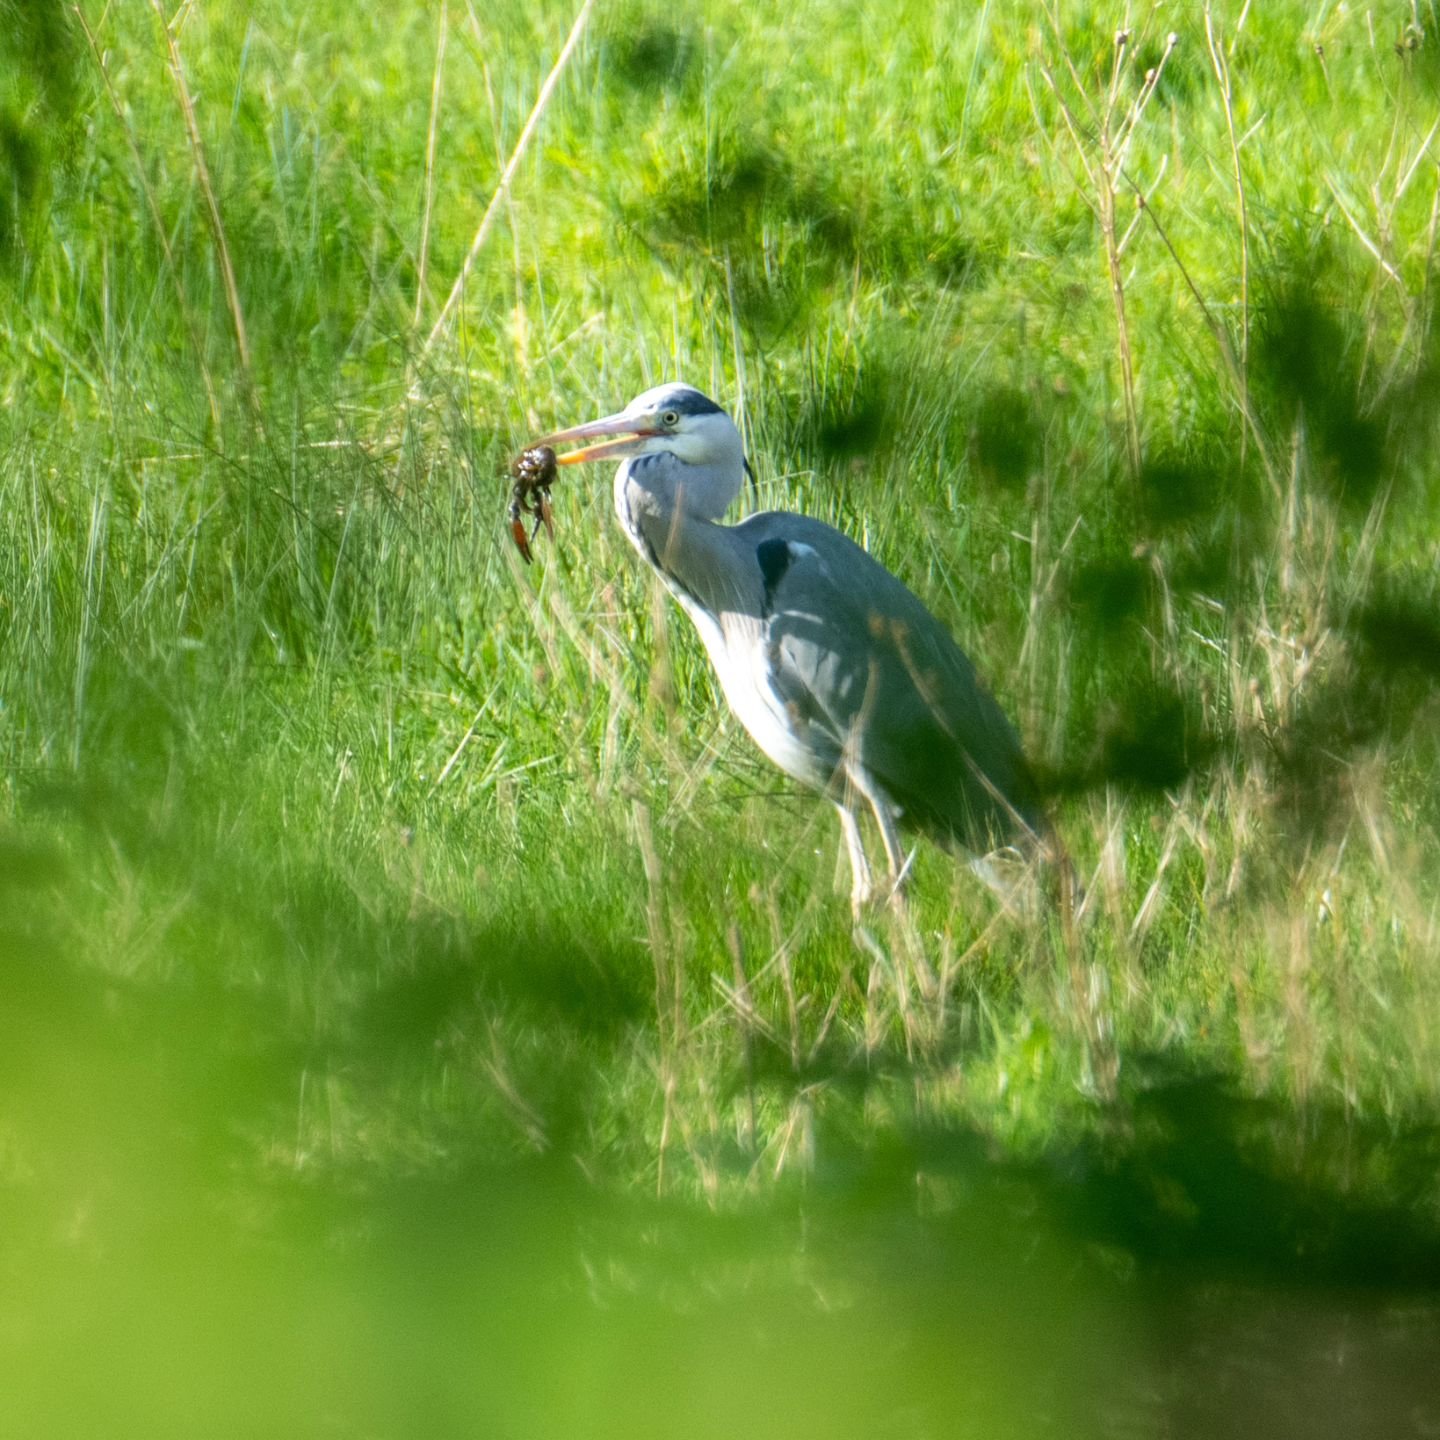 Whilst walking along the brook, we stumbled upon a heron who had just caught it's breakfast. It shot off straight away with its catch. Luckily it didn't go far and flew in to a neighbouring field so I was able to get a photo. I believe it had caught 